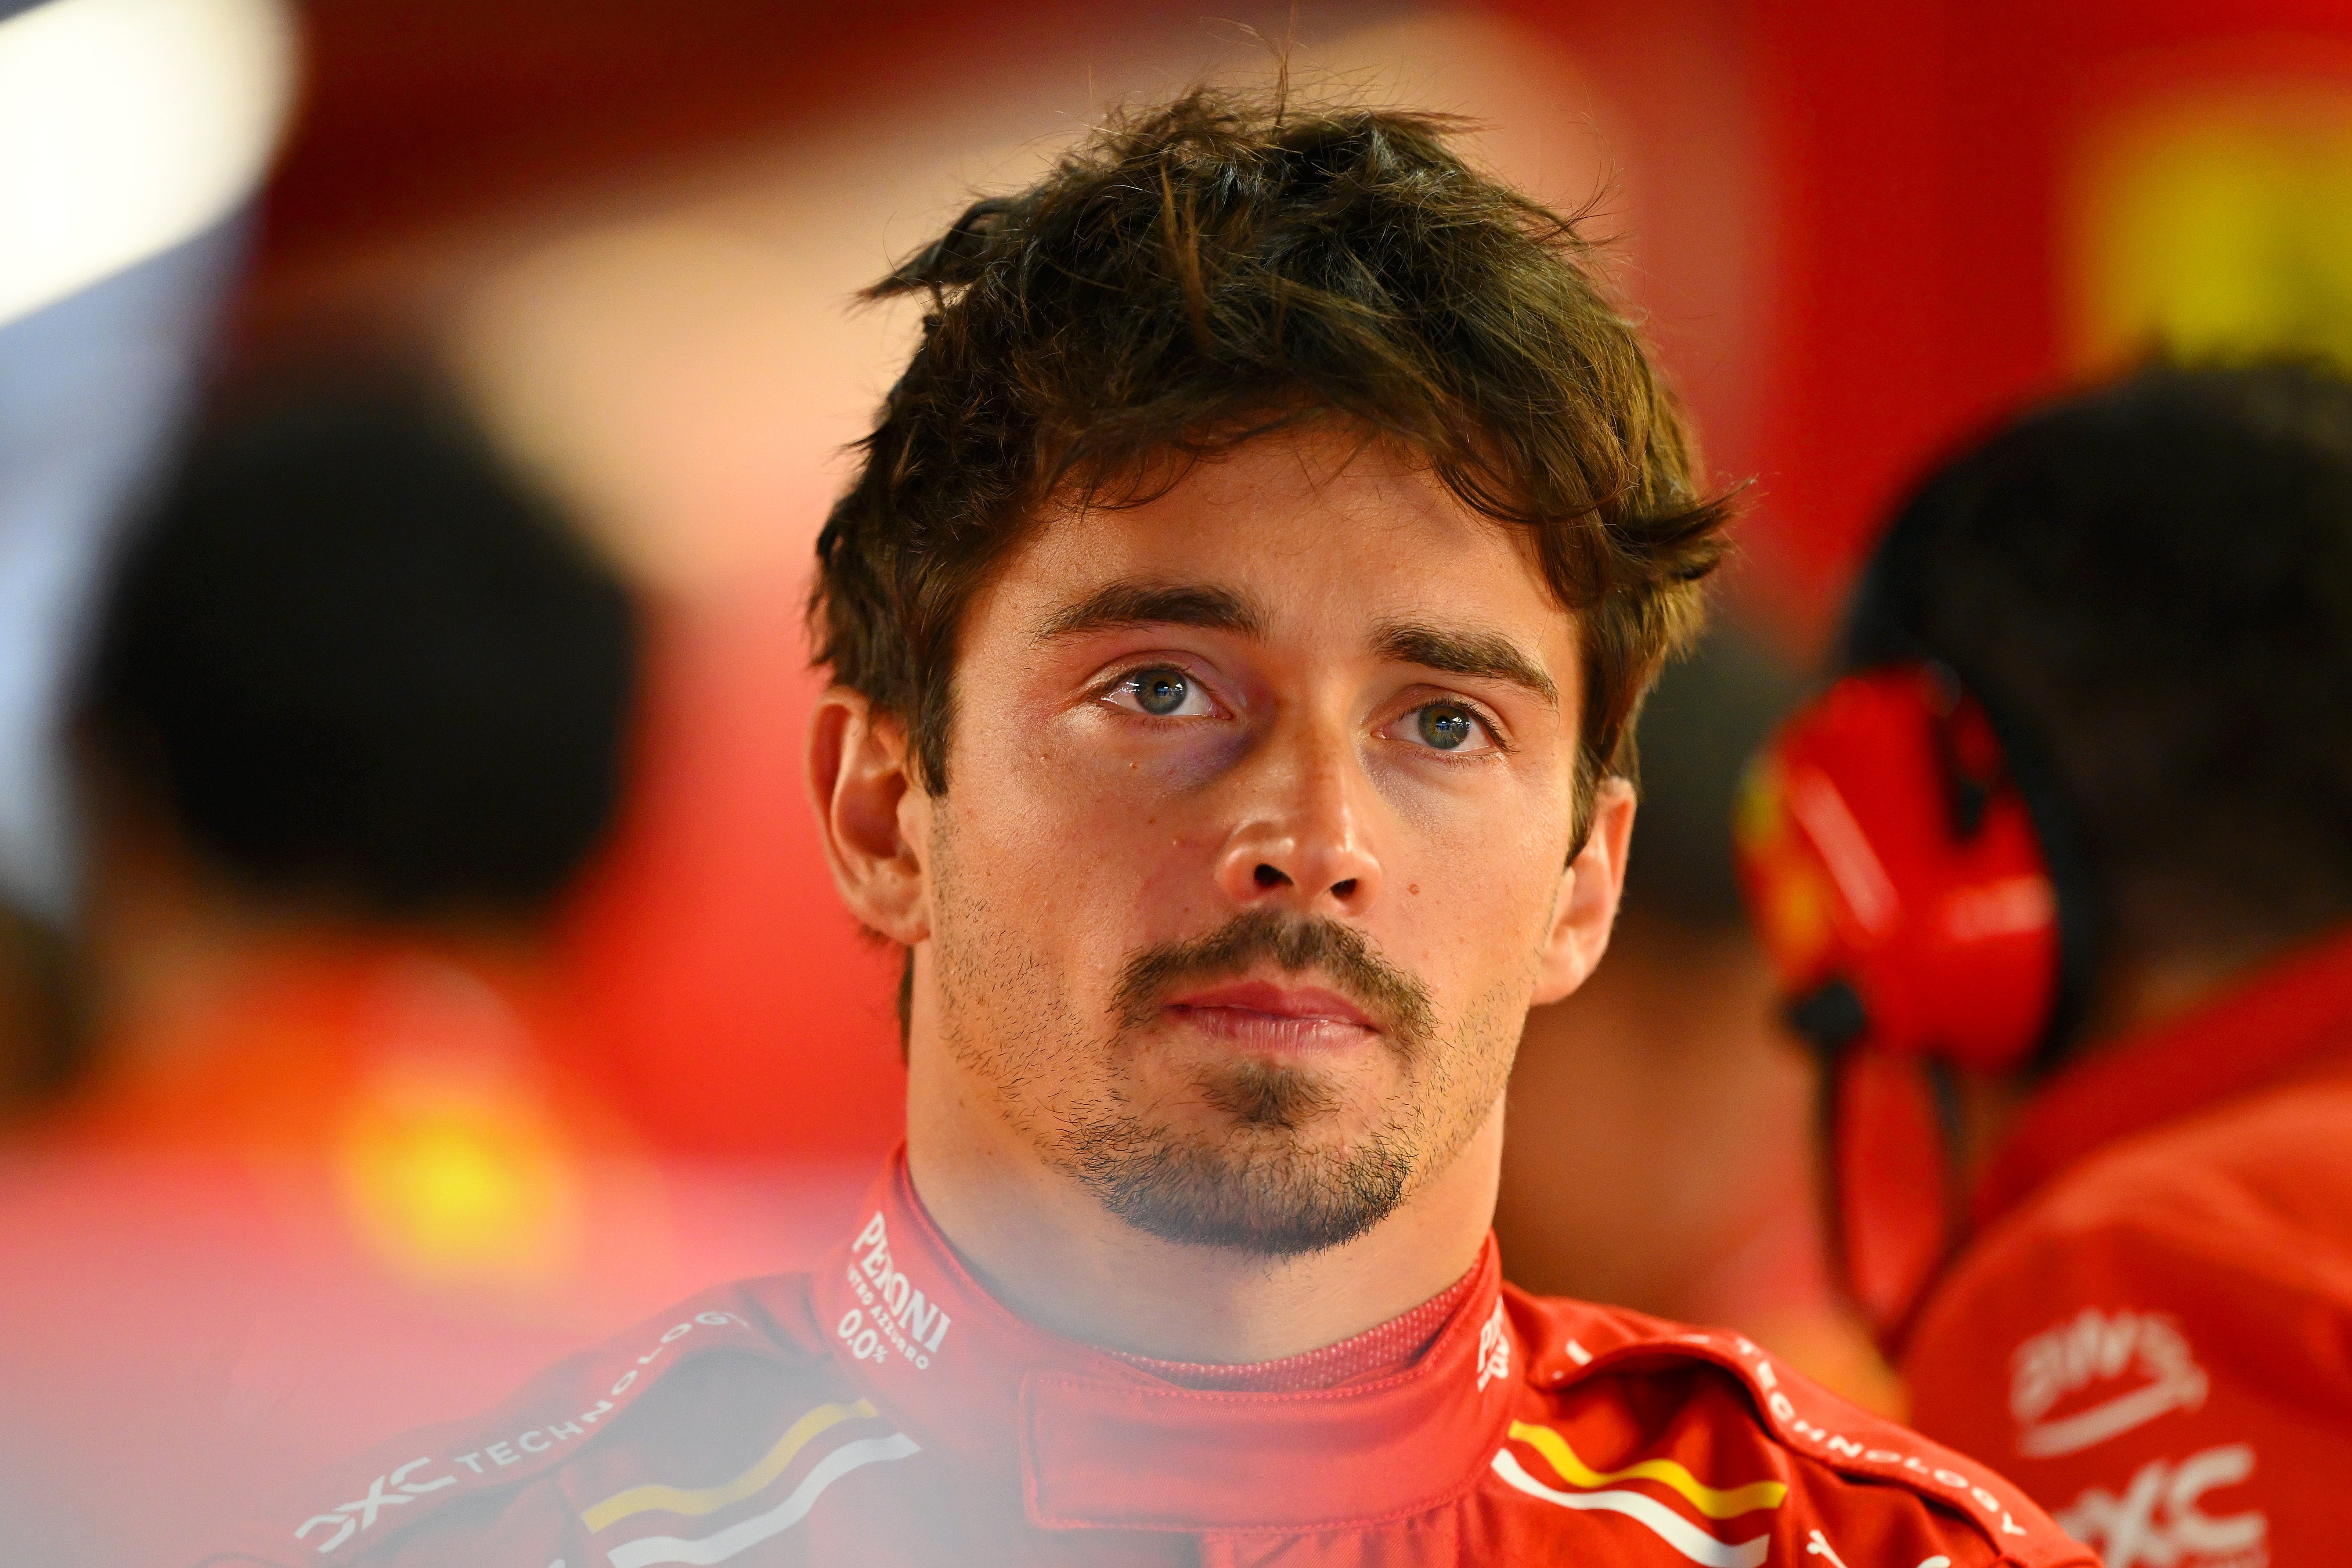 Charles Leclerc questioned Ferrari’s strategy on a tough day for the Scuderia in Japan